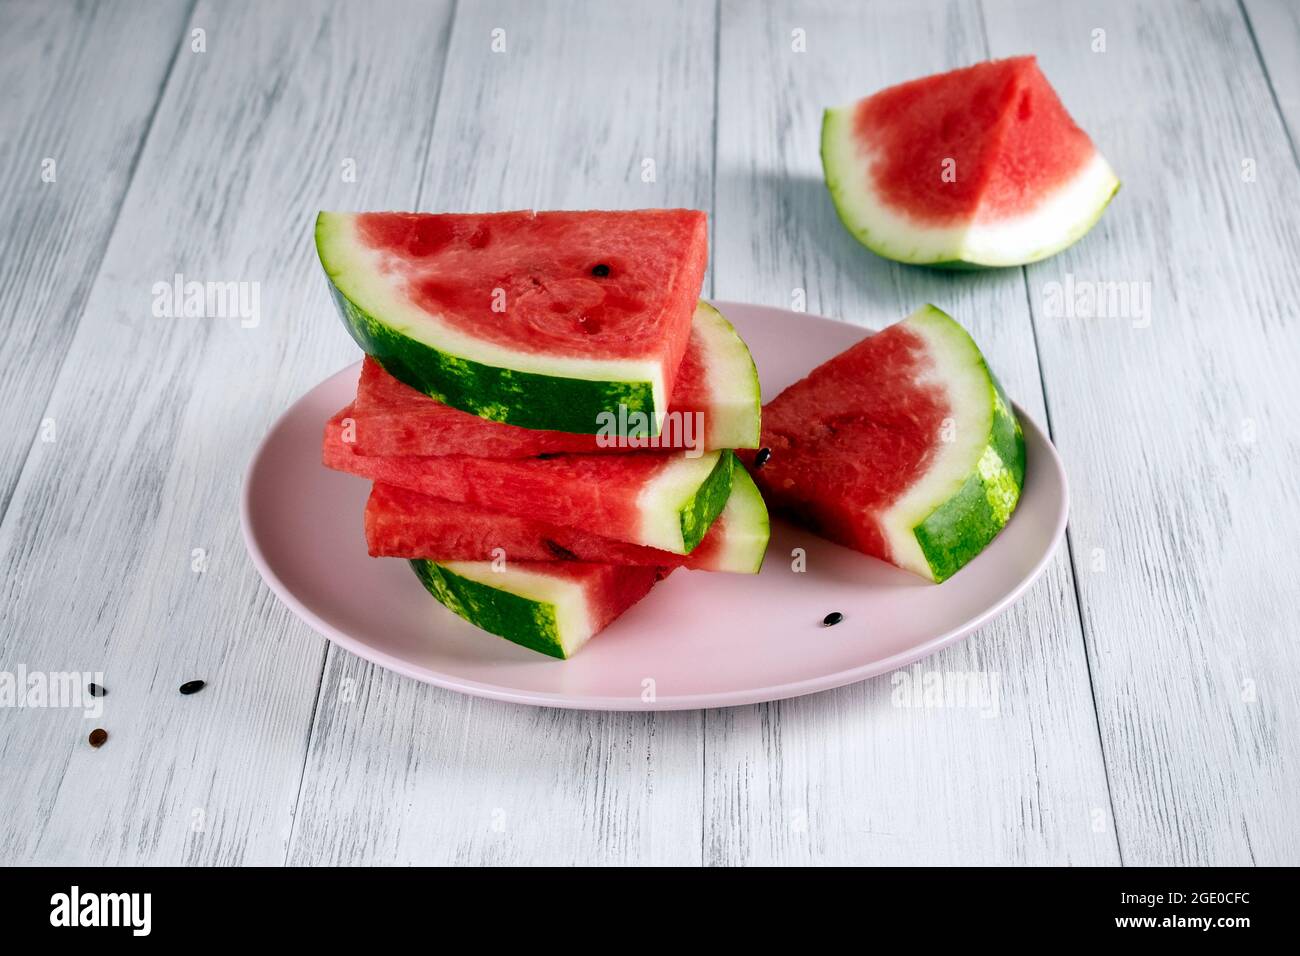 Sliced pieces of ripe red watermelon Stock Photo